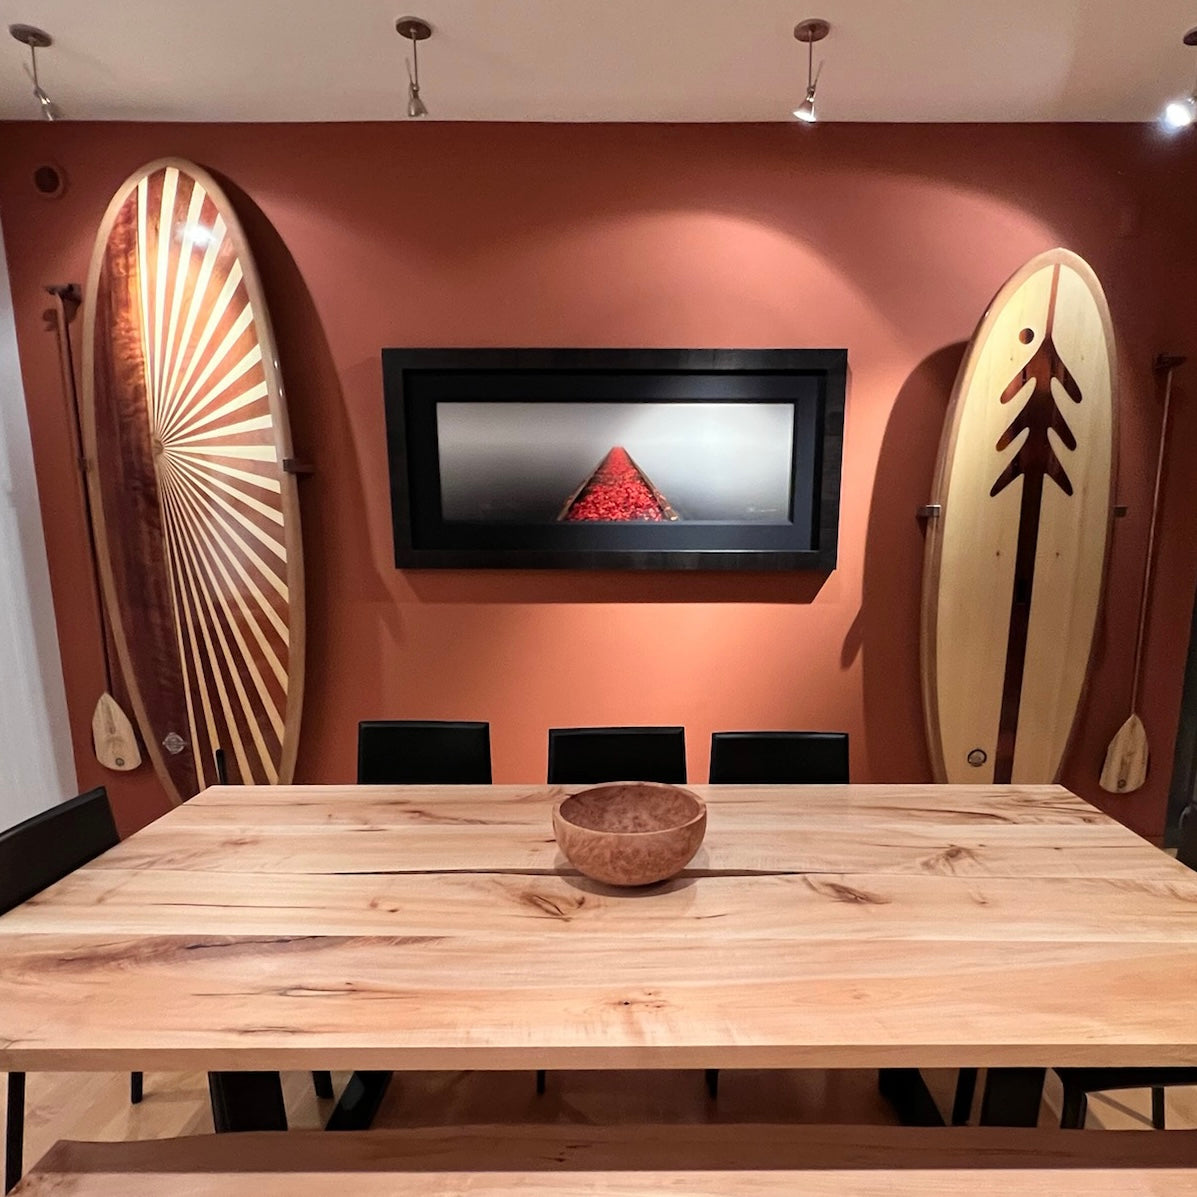 Why a wooden surfboard or paddle board is the perfect element in a beach or lake house interior design project